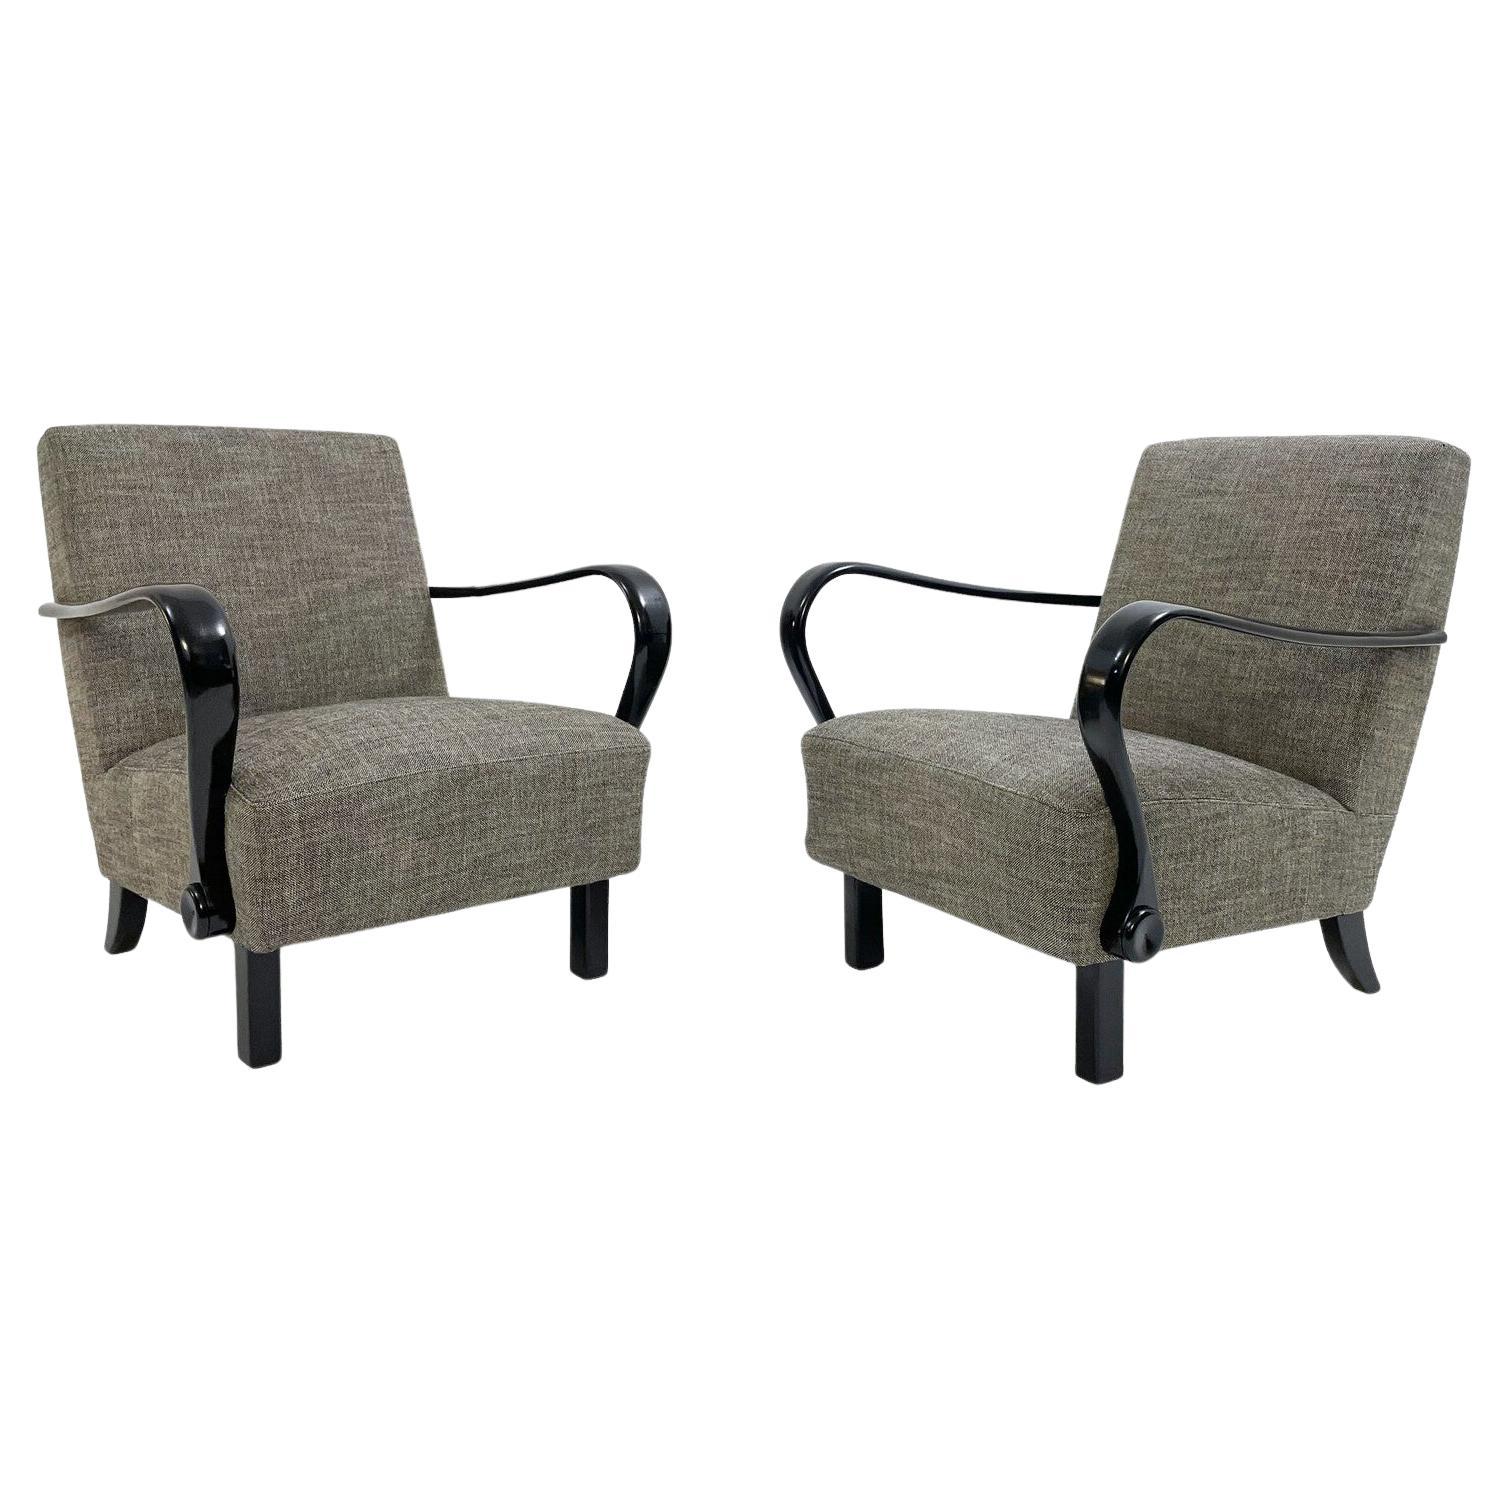 Mid-Century Modern Pair of Bentwood Armchairs H-320 by Jindrich Halabala